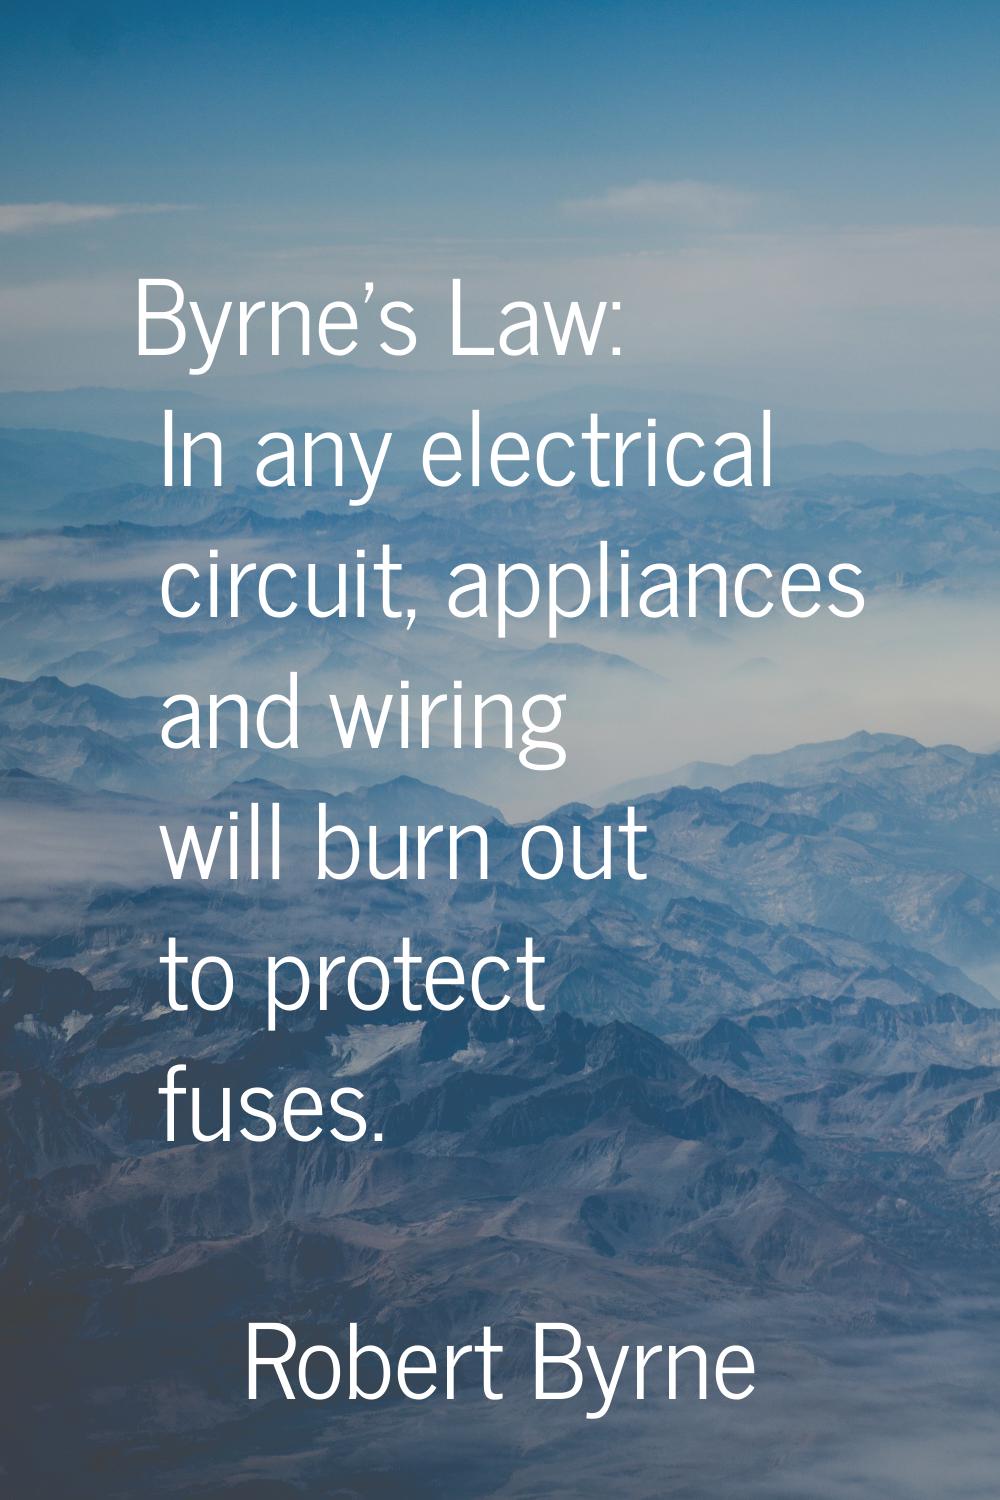 Byrne's Law: In any electrical circuit, appliances and wiring will burn out to protect fuses.